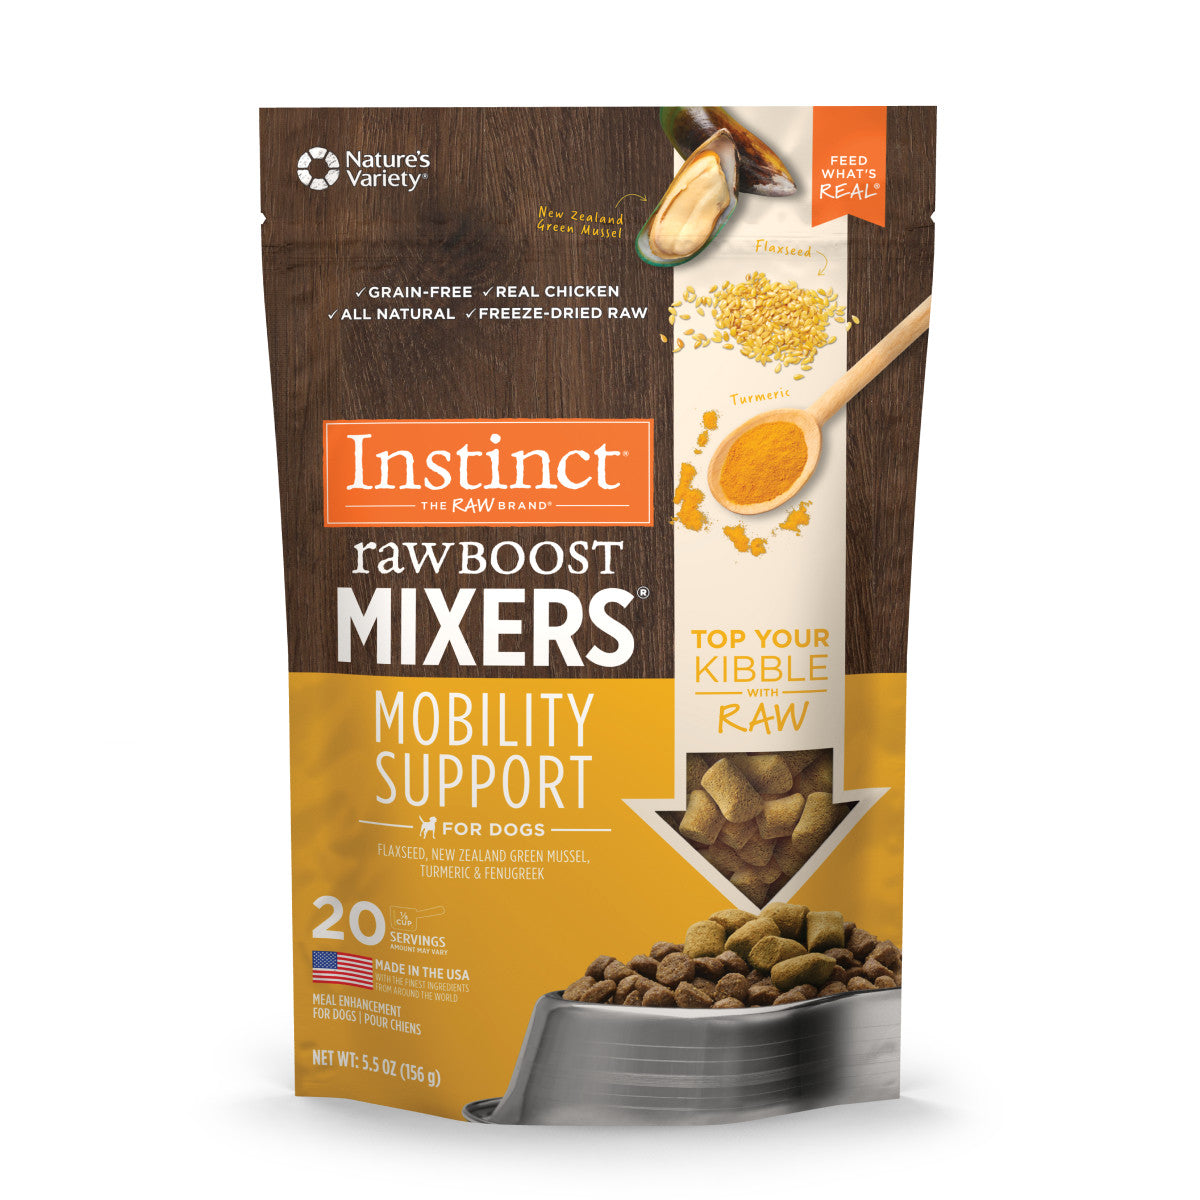 Instinct - Raw Boost Mixers Mobility Support